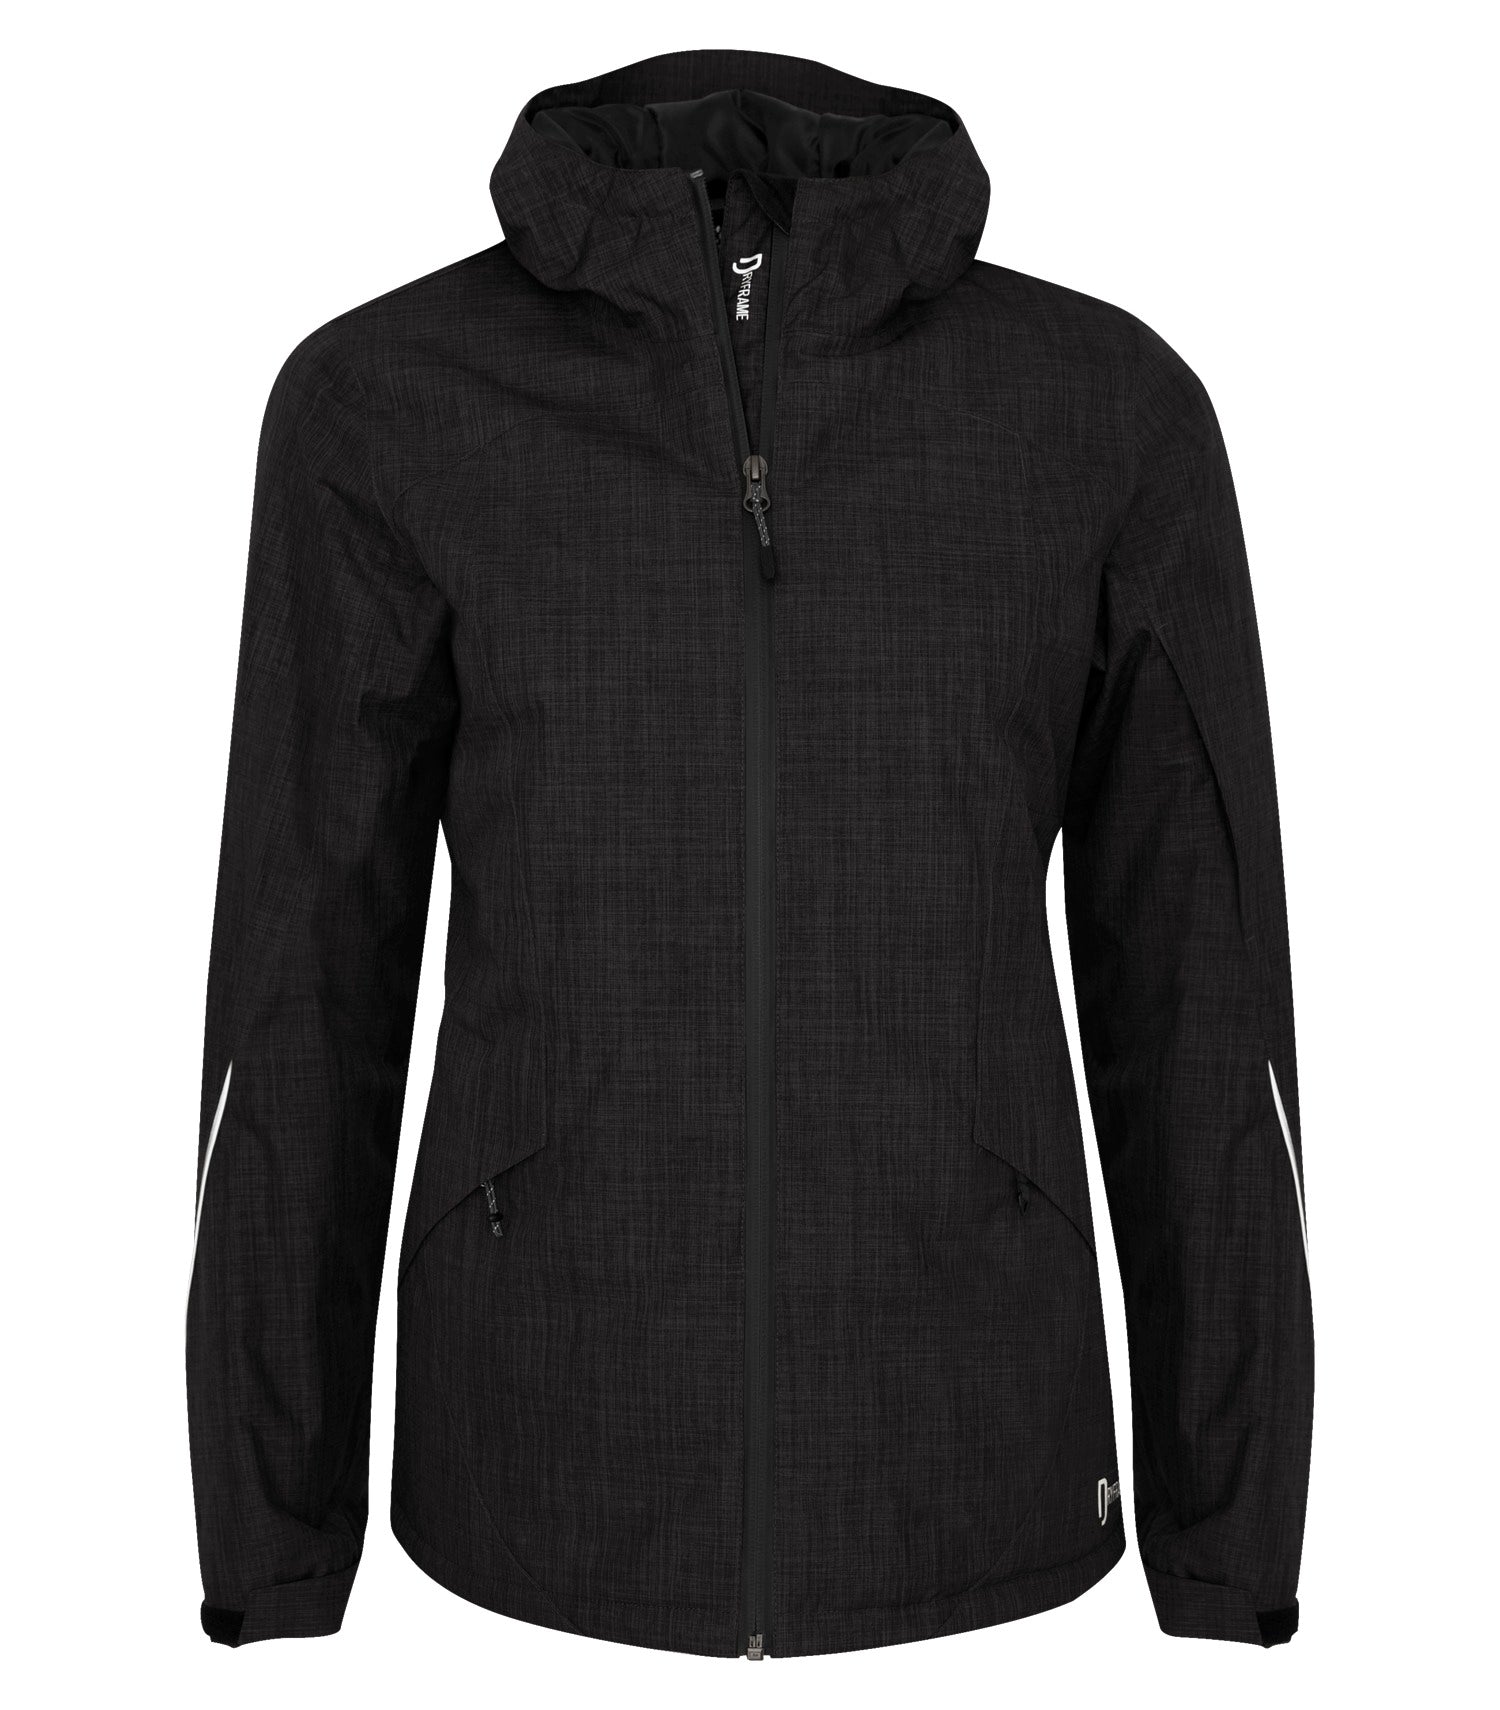 DRYFRAME® THERMO TECH INSULATED WATERPROOF LADIES' JACKET. DF7633L